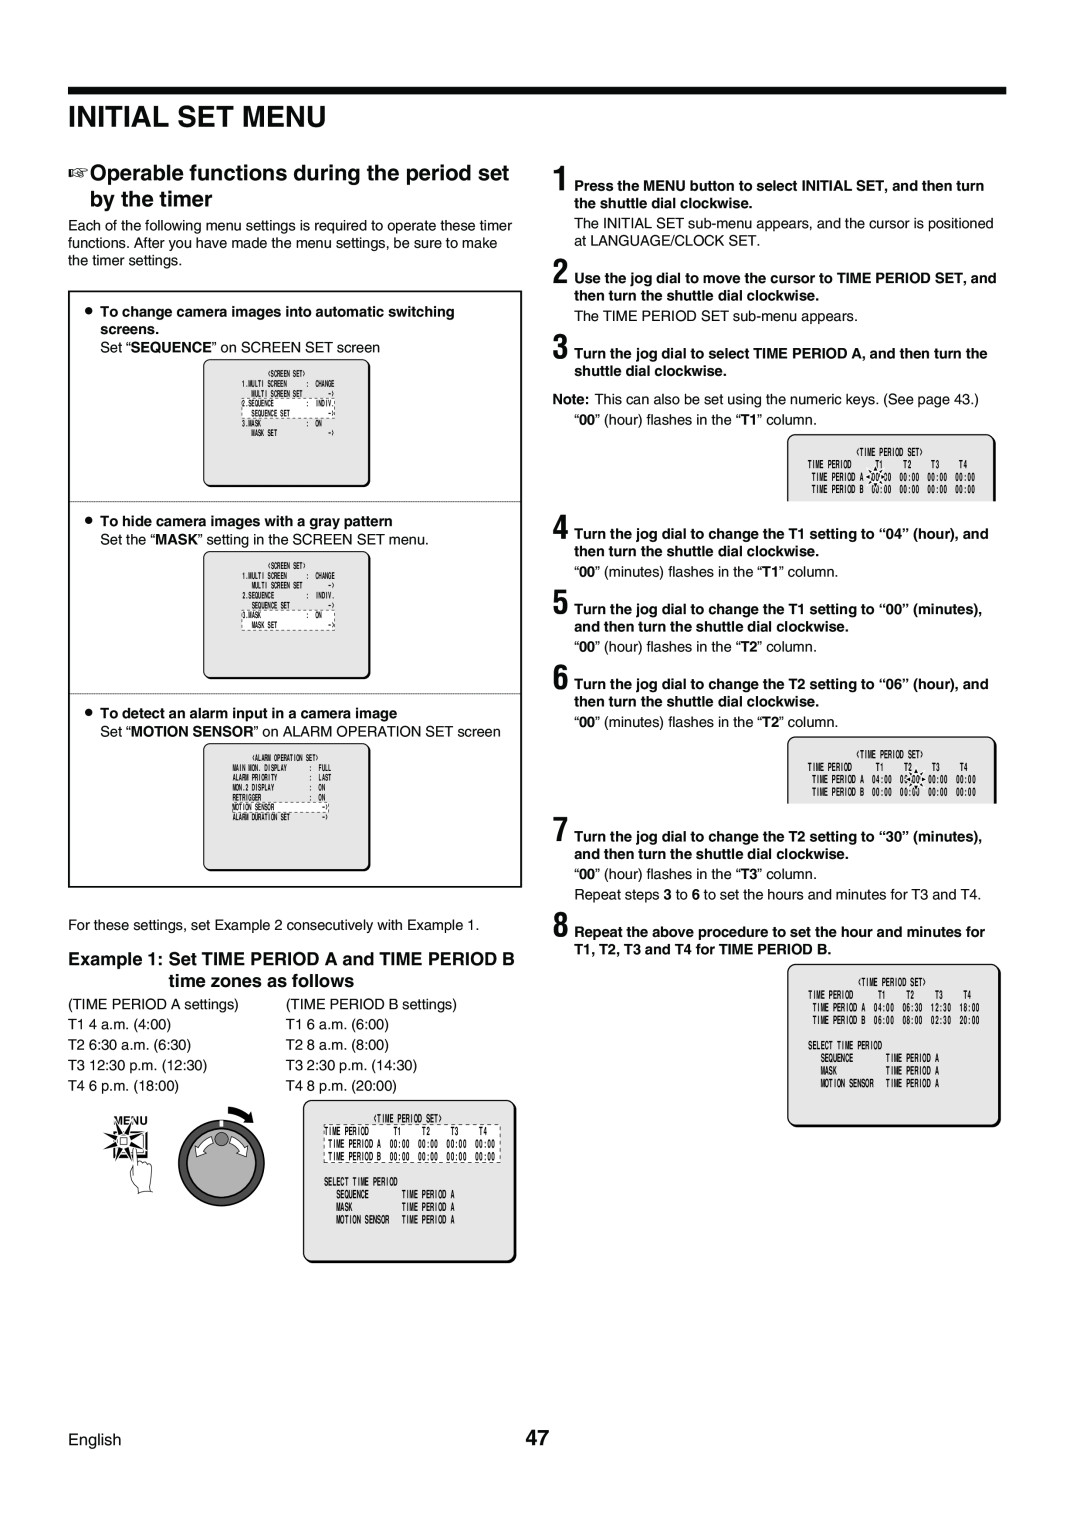 Sanyo DSR-3009P instruction manual Operable functions during the period set by the timer, Initial Set Menu 